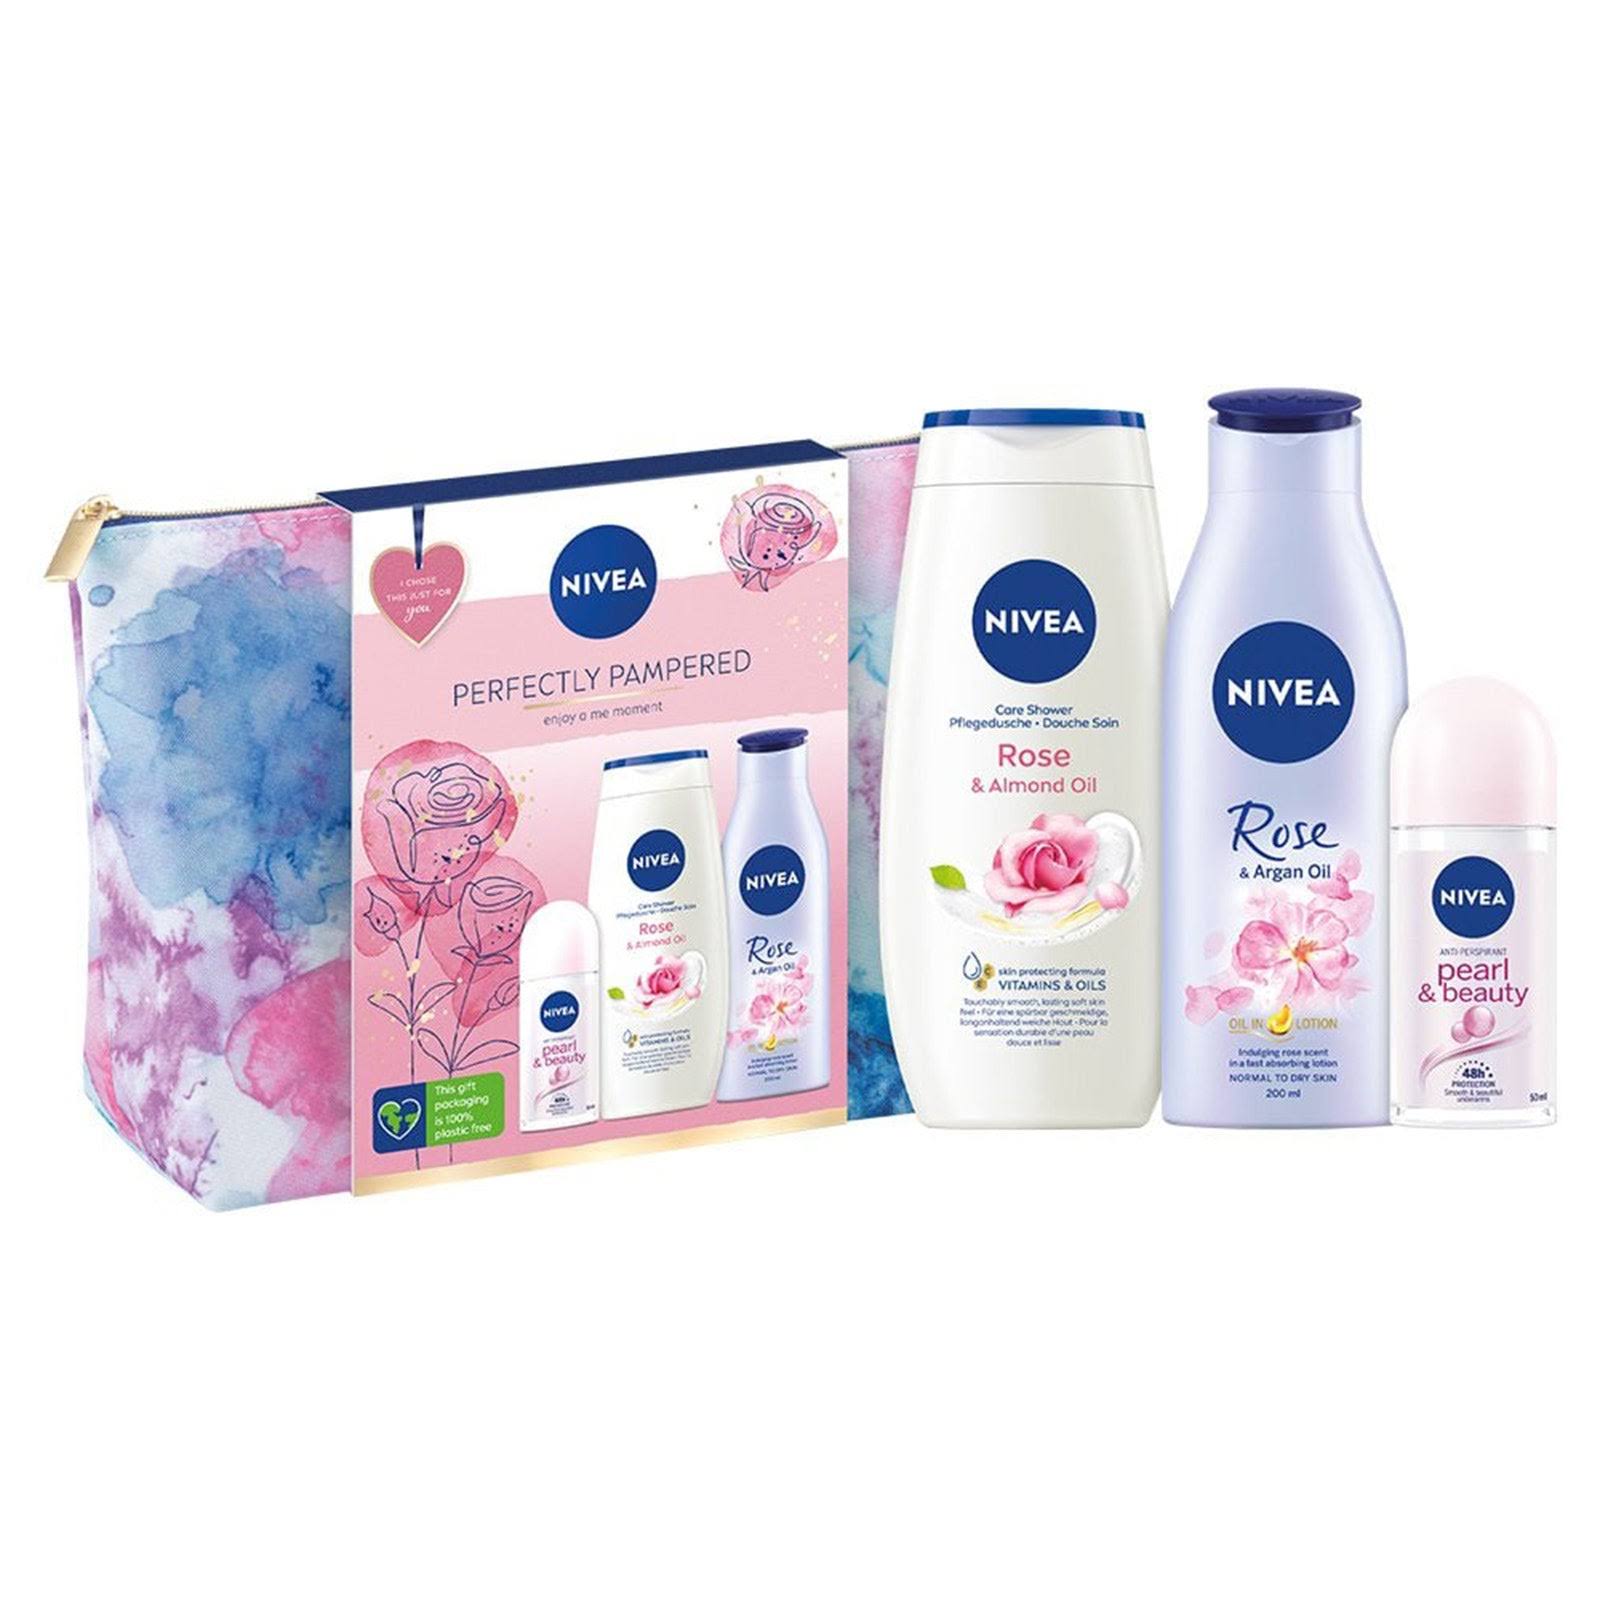 Nivea Perfectly Pampered 3 Piece Giftset Bag